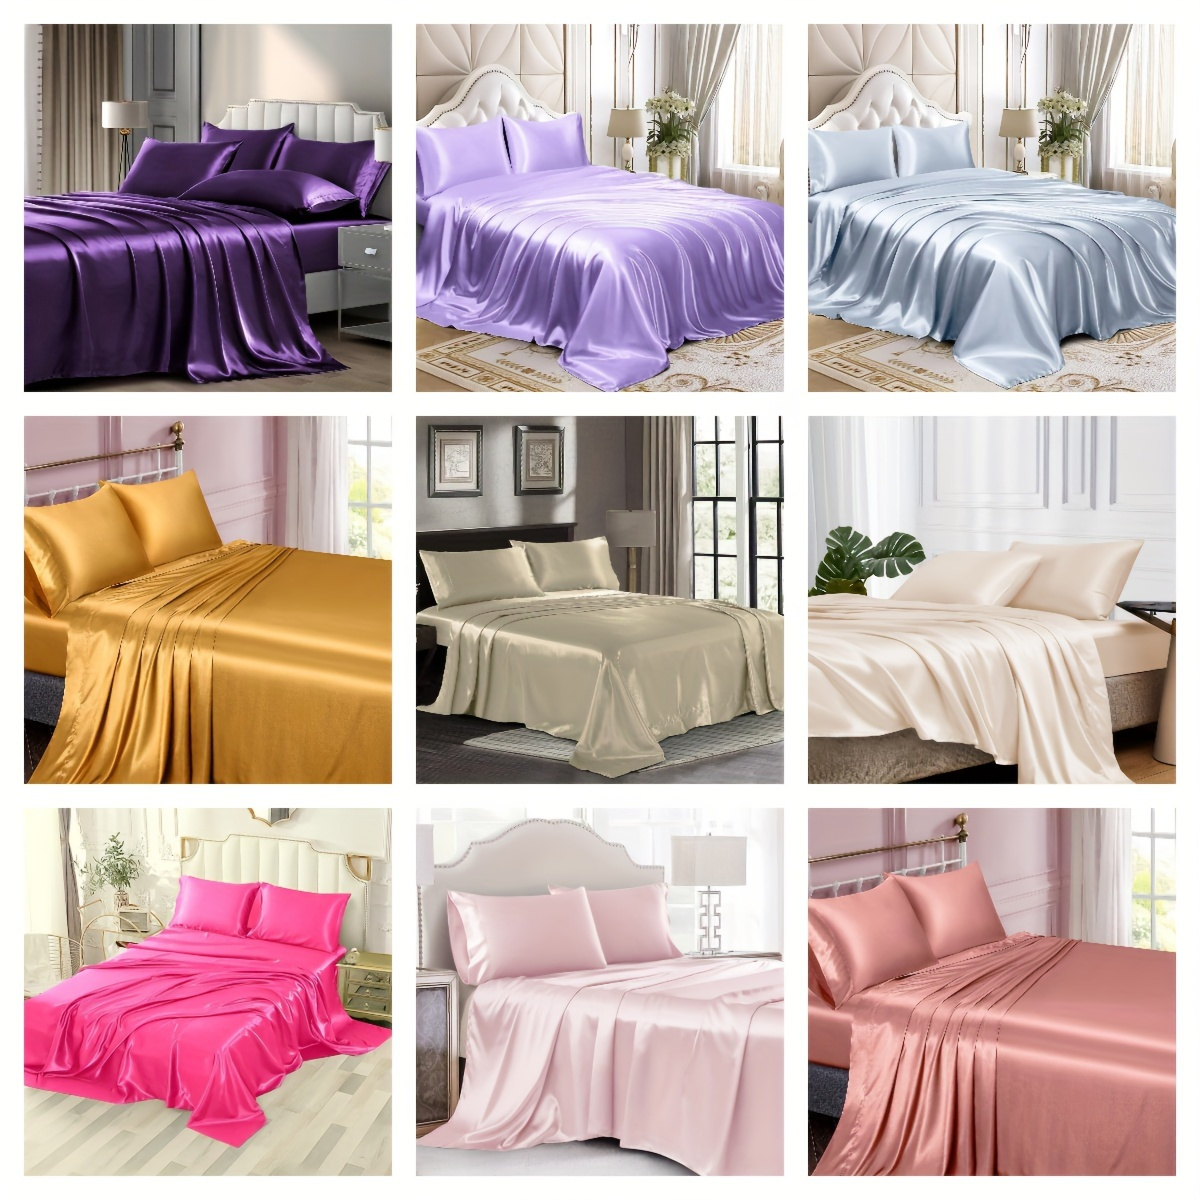 

3/4pcs Solid Color Fitted Sheet Set, Satin Fabric, Soft Comfortable Breathable Bedding Set, For Bedroom, Guest Room (1*flat Sheet + 1* Fitted Sheet + 1/2*pillowcases, Without Core)